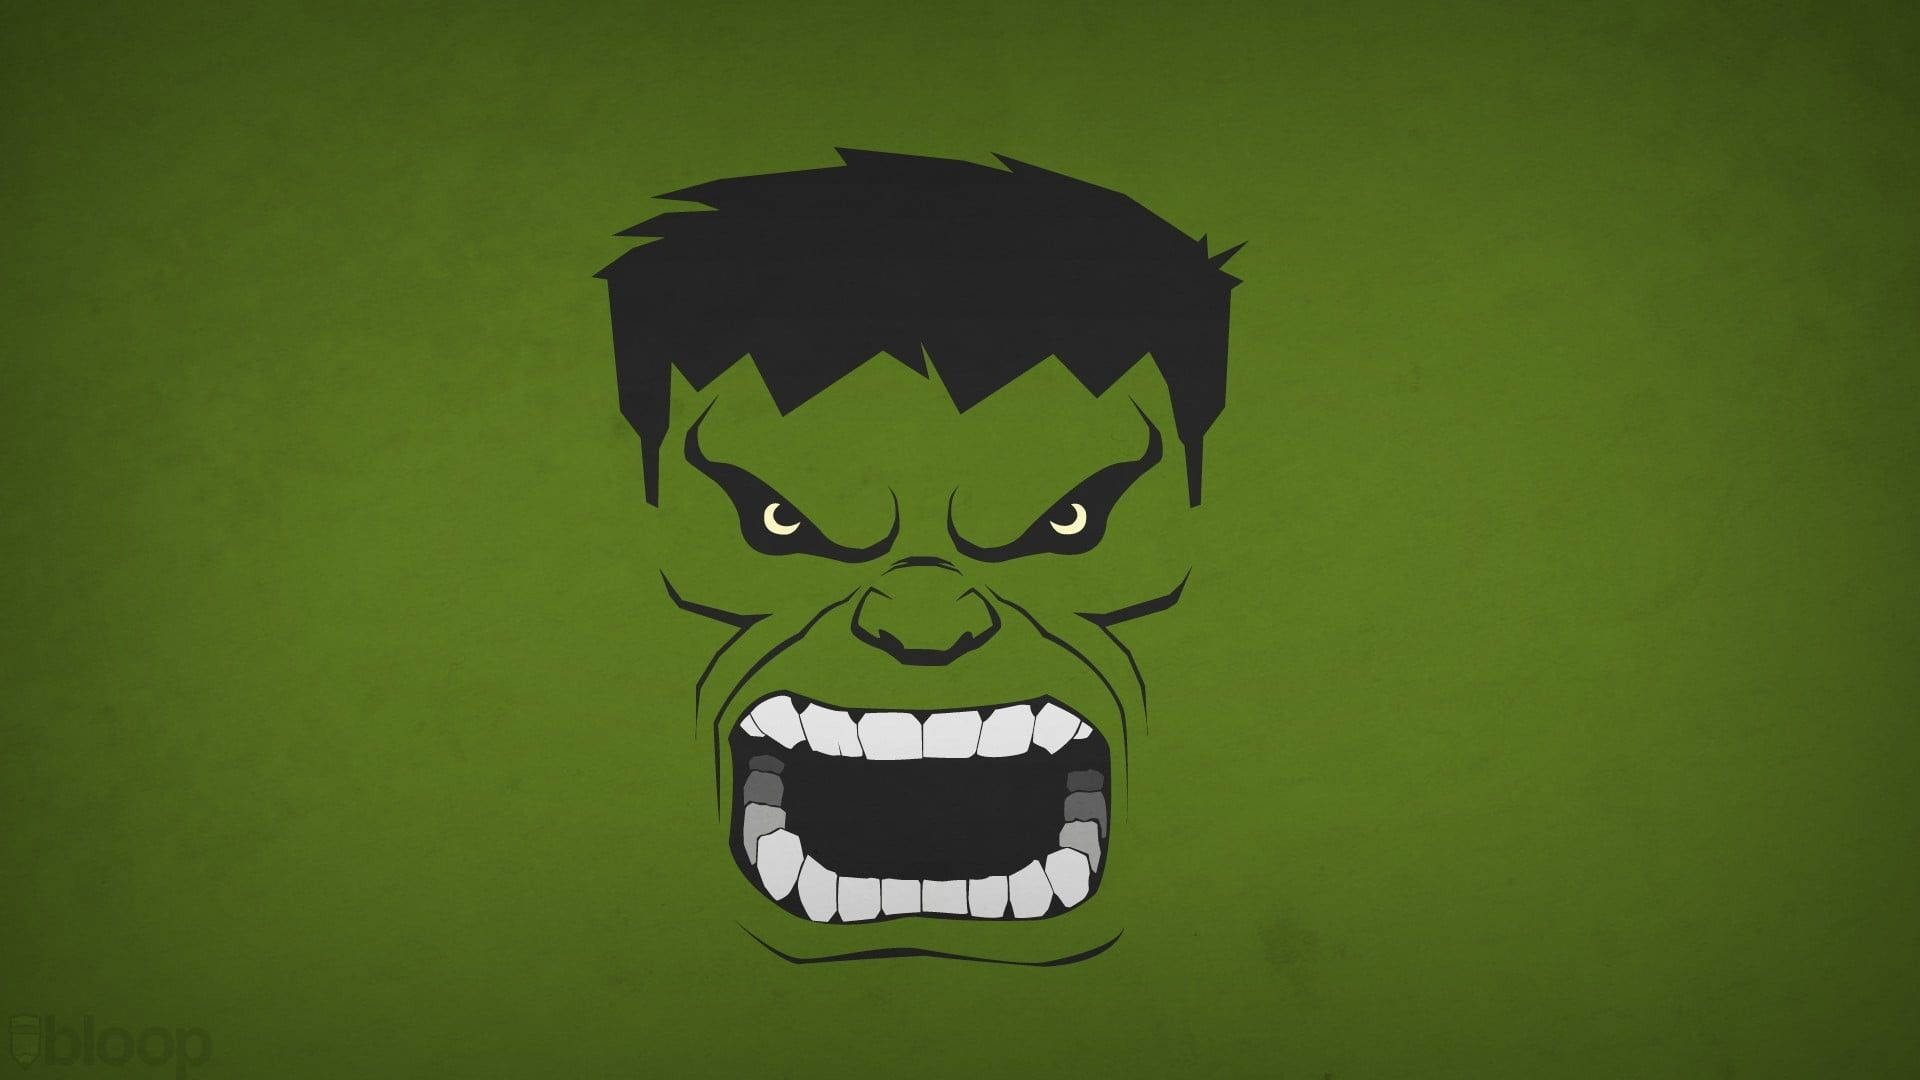 Incredible Hulk Angry Face Background